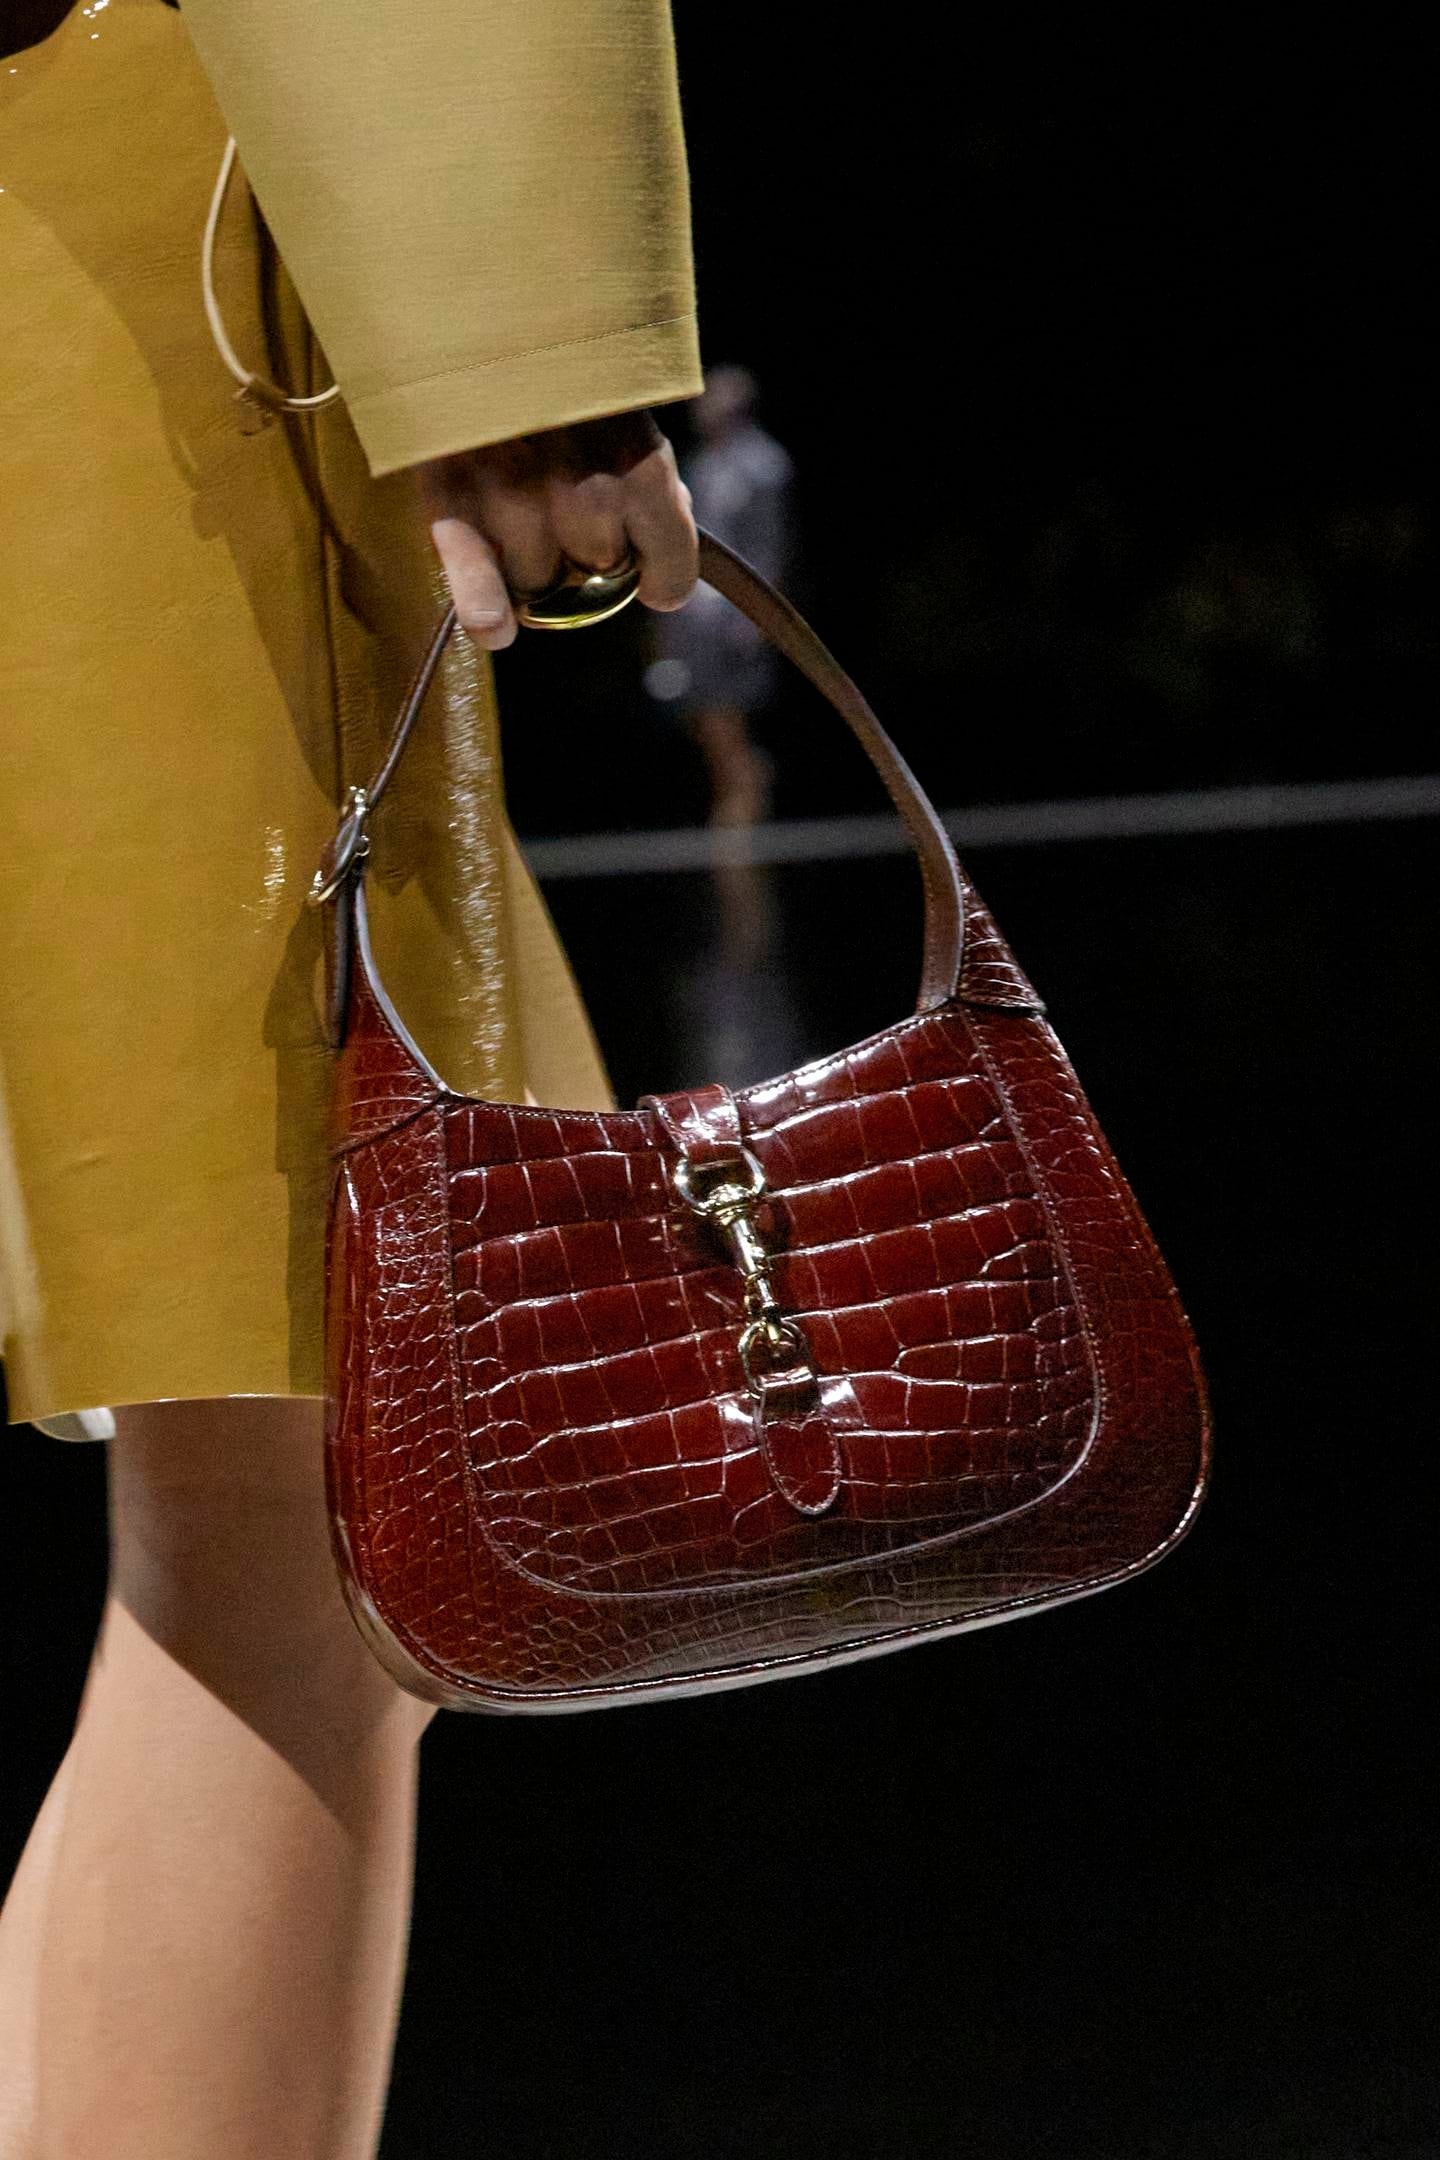 Exotic skins on Jackie bags signalled progress to burnishing Gucci's classic, top-end image.